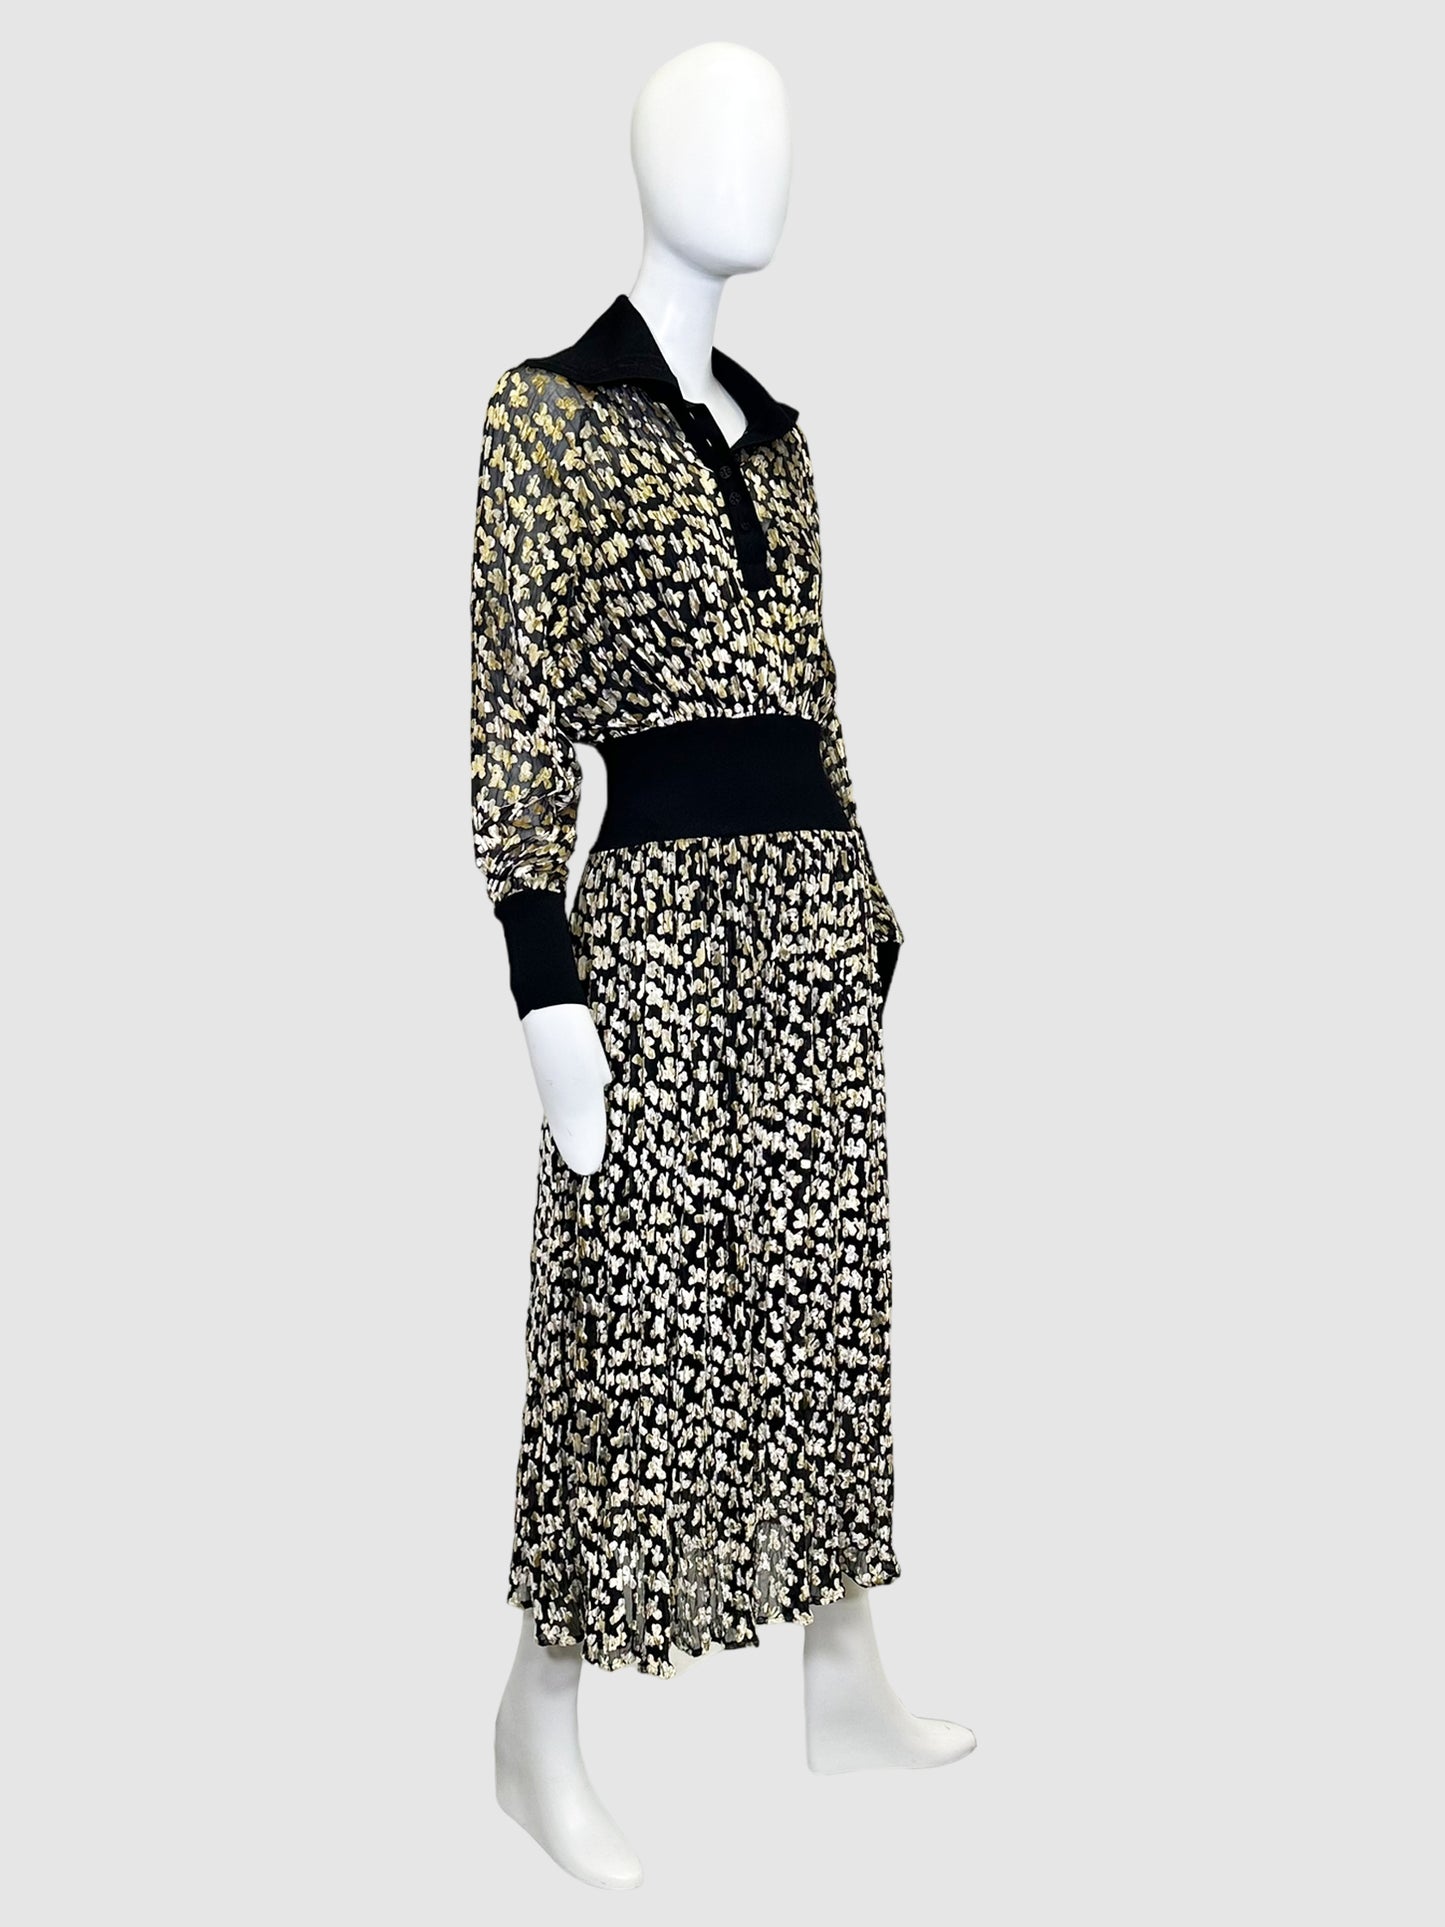 Tory Burch Floral Print Mesh and Velvet Maxi Dress - Size 4